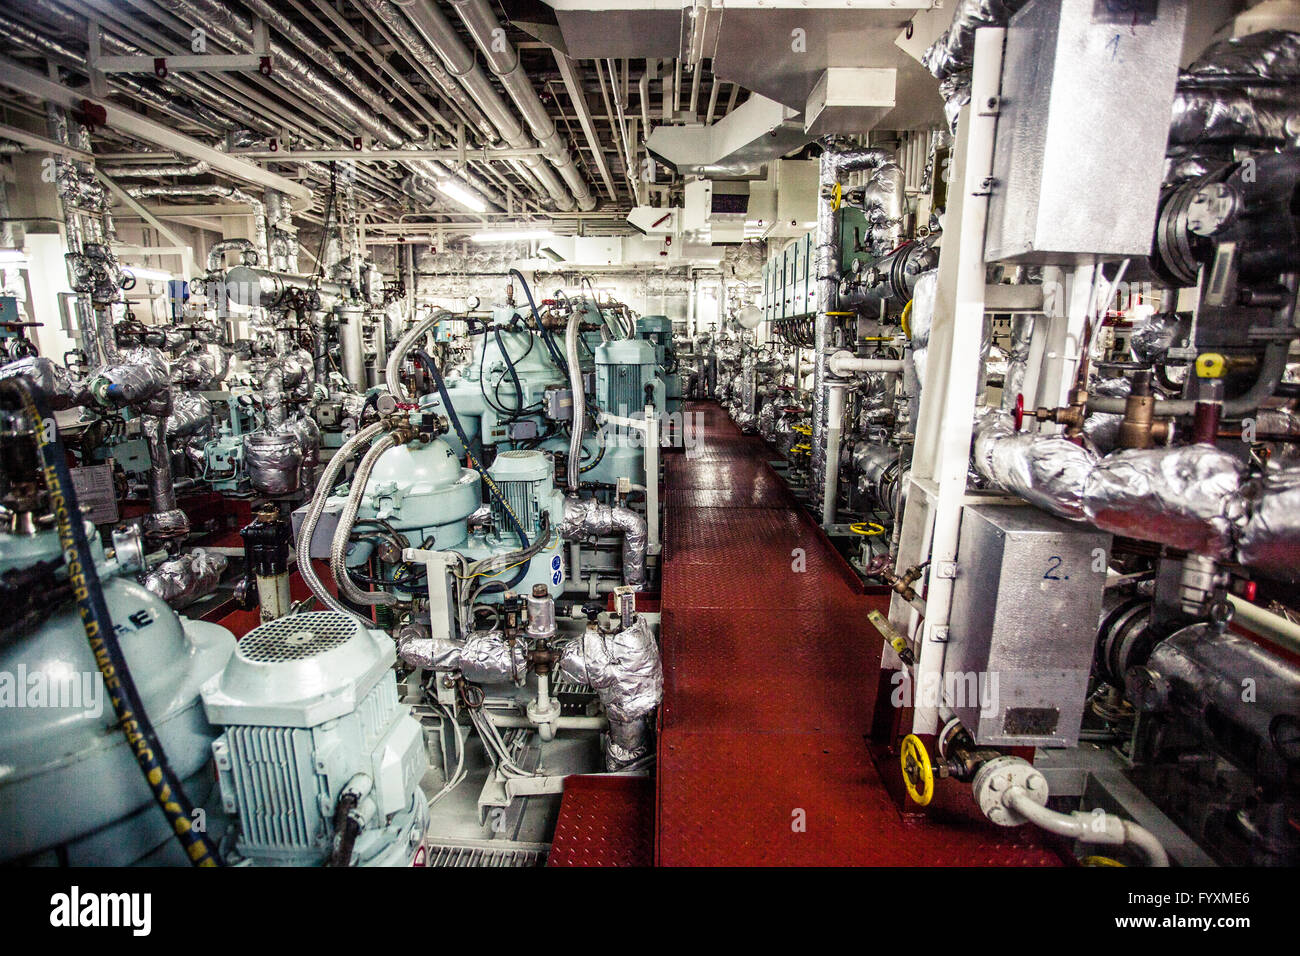 Life support systems (water pumps, air conditioning units, etc.) on board a container ship at sea. Stock Photo